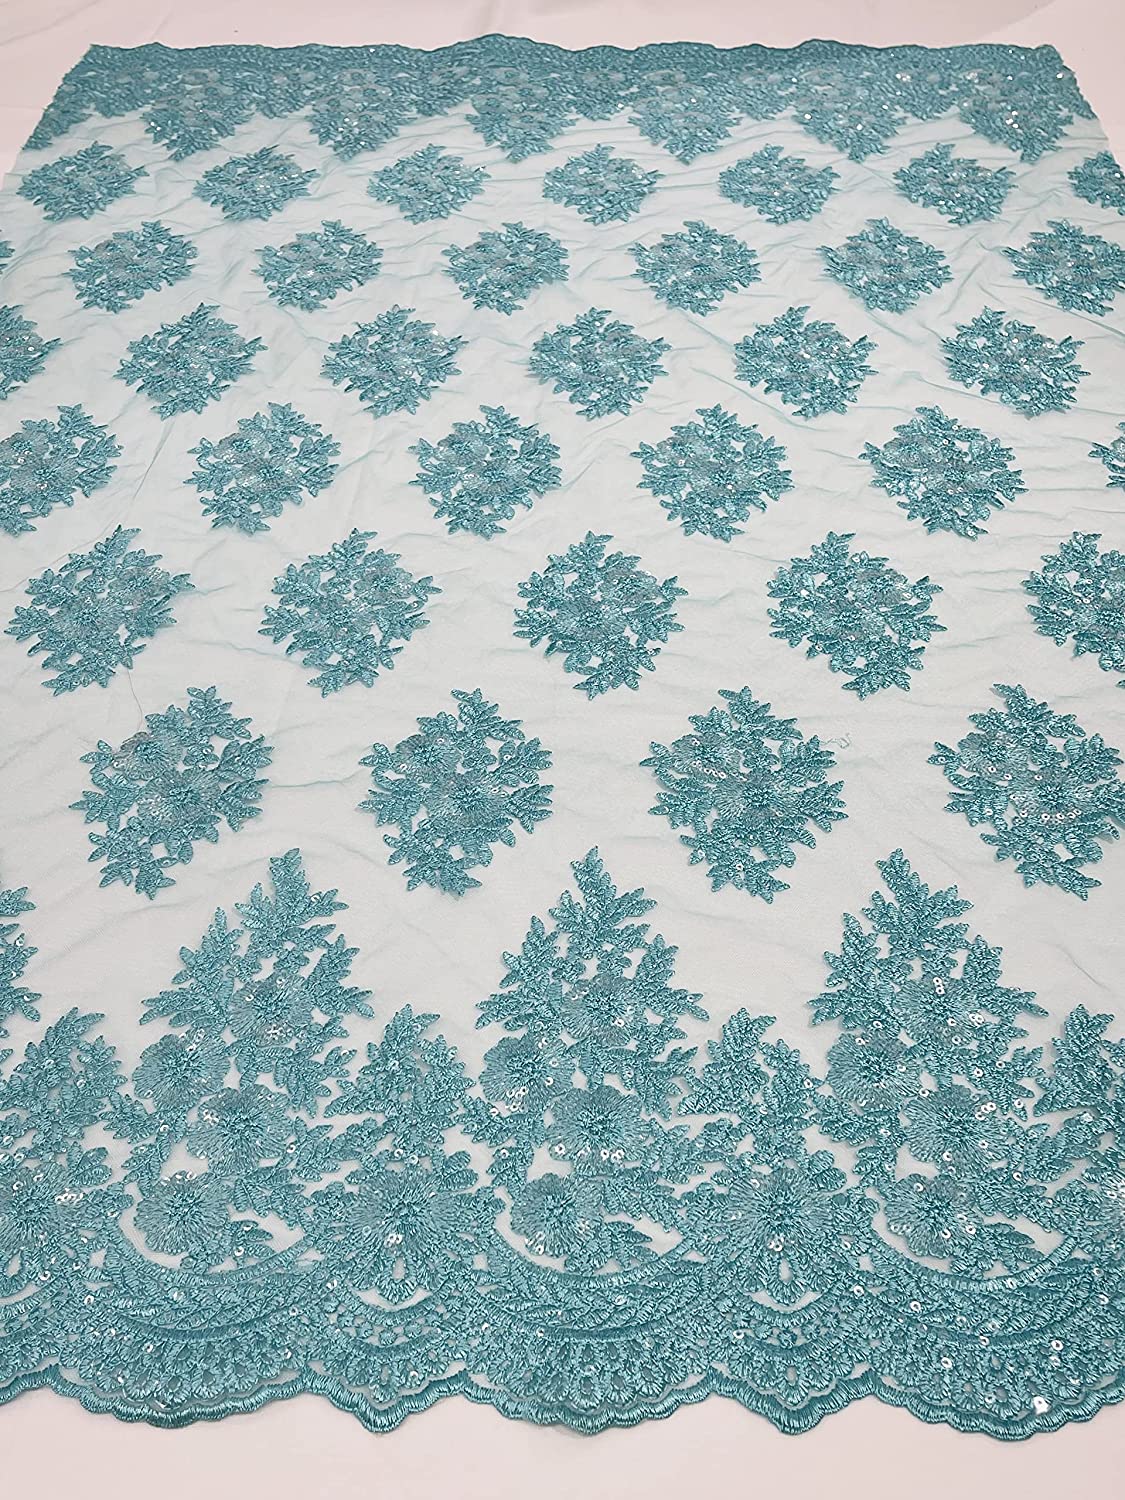 Emma Design Floral Corded Embroider with Sequins, Solid and with Glitter Mesh Lace Fabric (1 Yard, Solid Mesh Aqua)